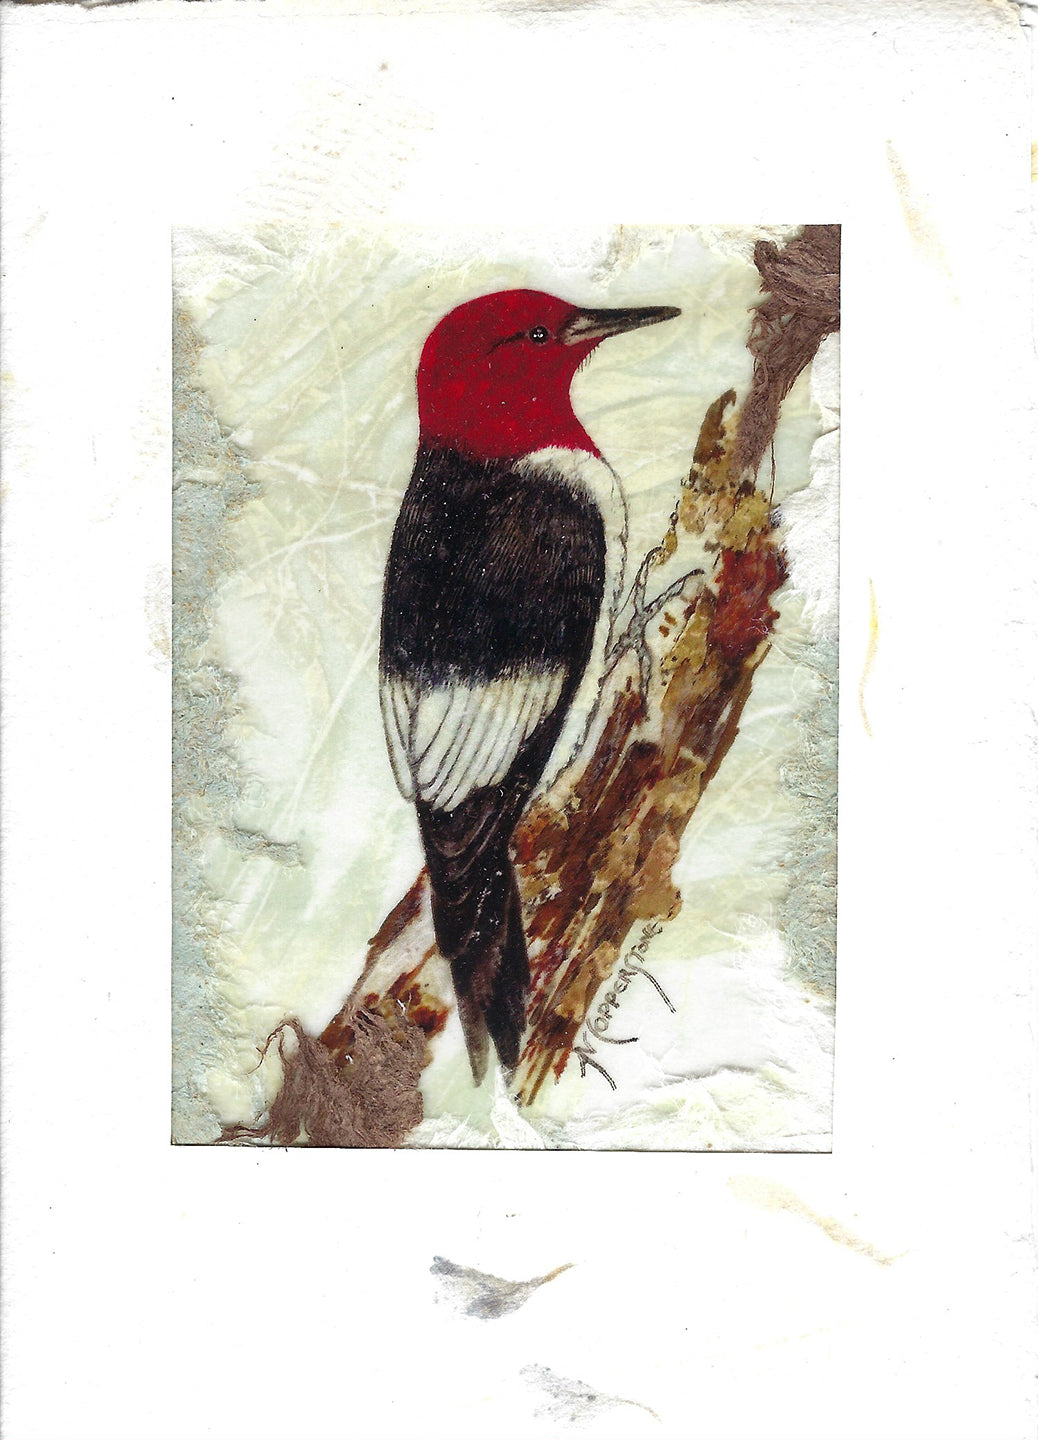 Woodpecker - Blank greeting card by Janice A. Copperstone of Milford, Mich.  